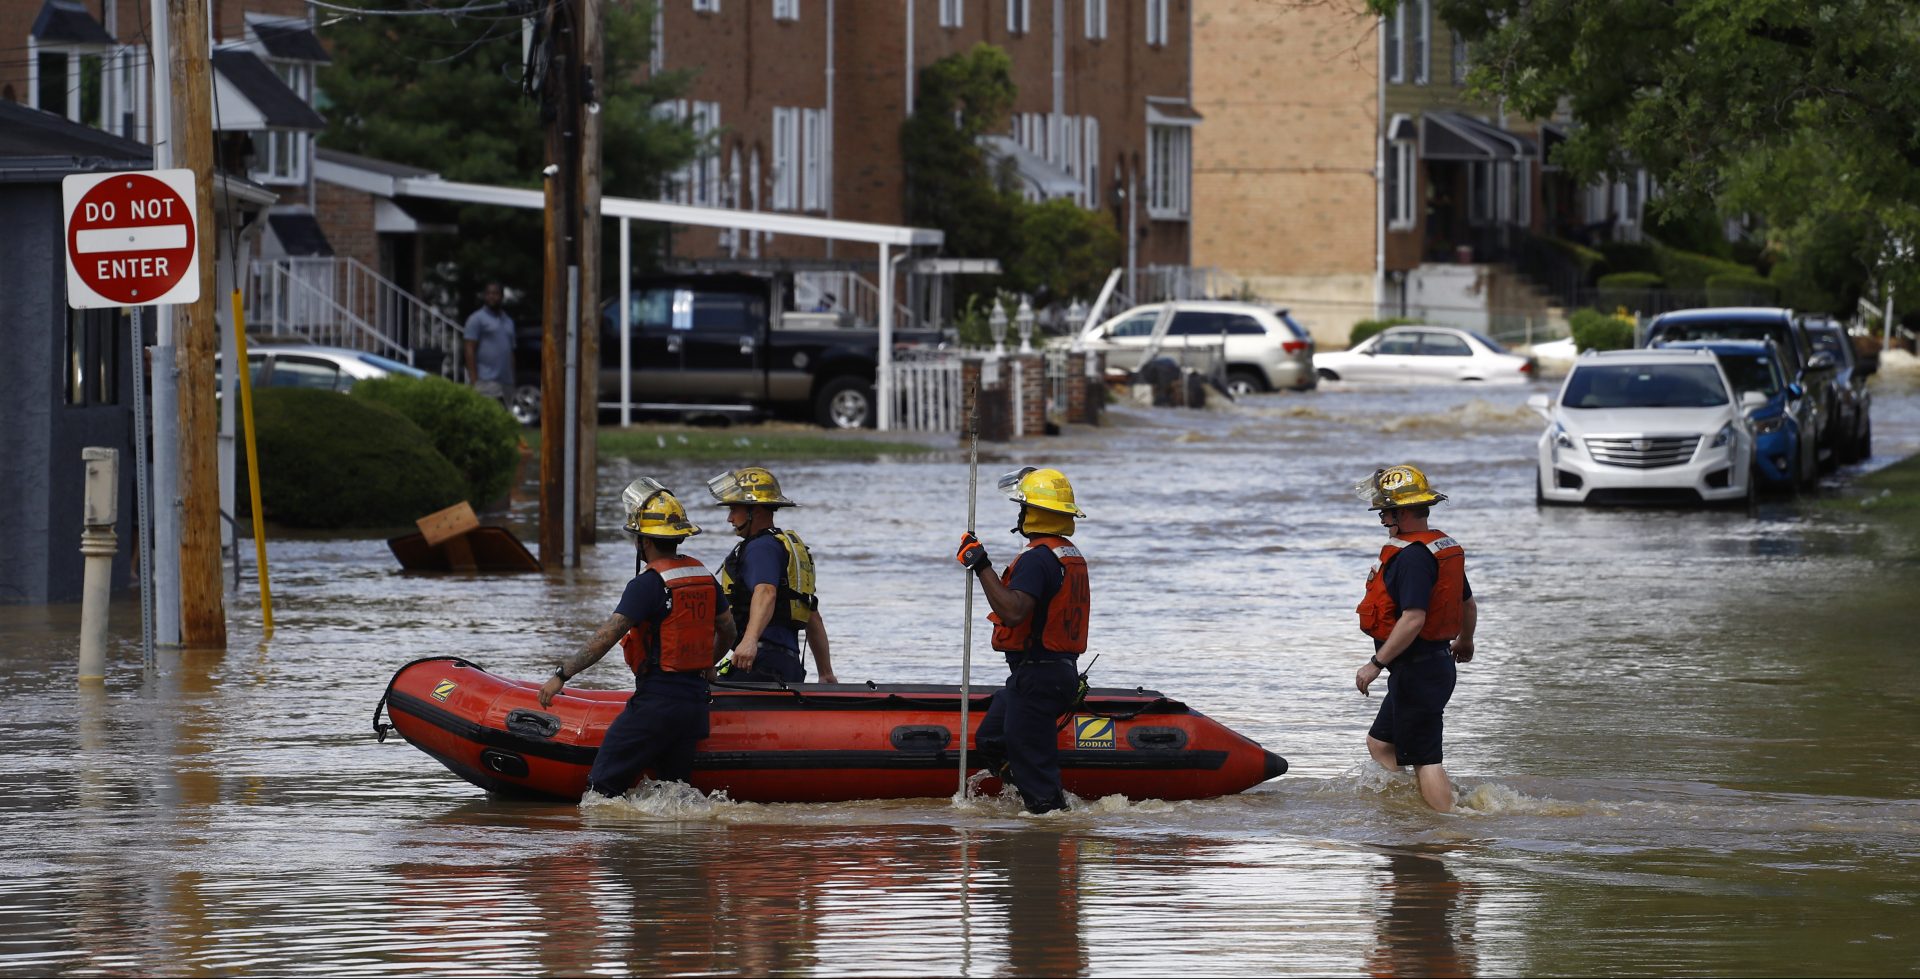 Philadelphia firefighters walk through a flooded neighborhood after Tropical Storm Isaias moved through, Tuesday, Aug. 4, 2020, in Philadelphia. The storm spawned tornadoes and dumped rain during an inland march up the U.S. East Coast after making landfall as a hurricane along the North Carolina coast.